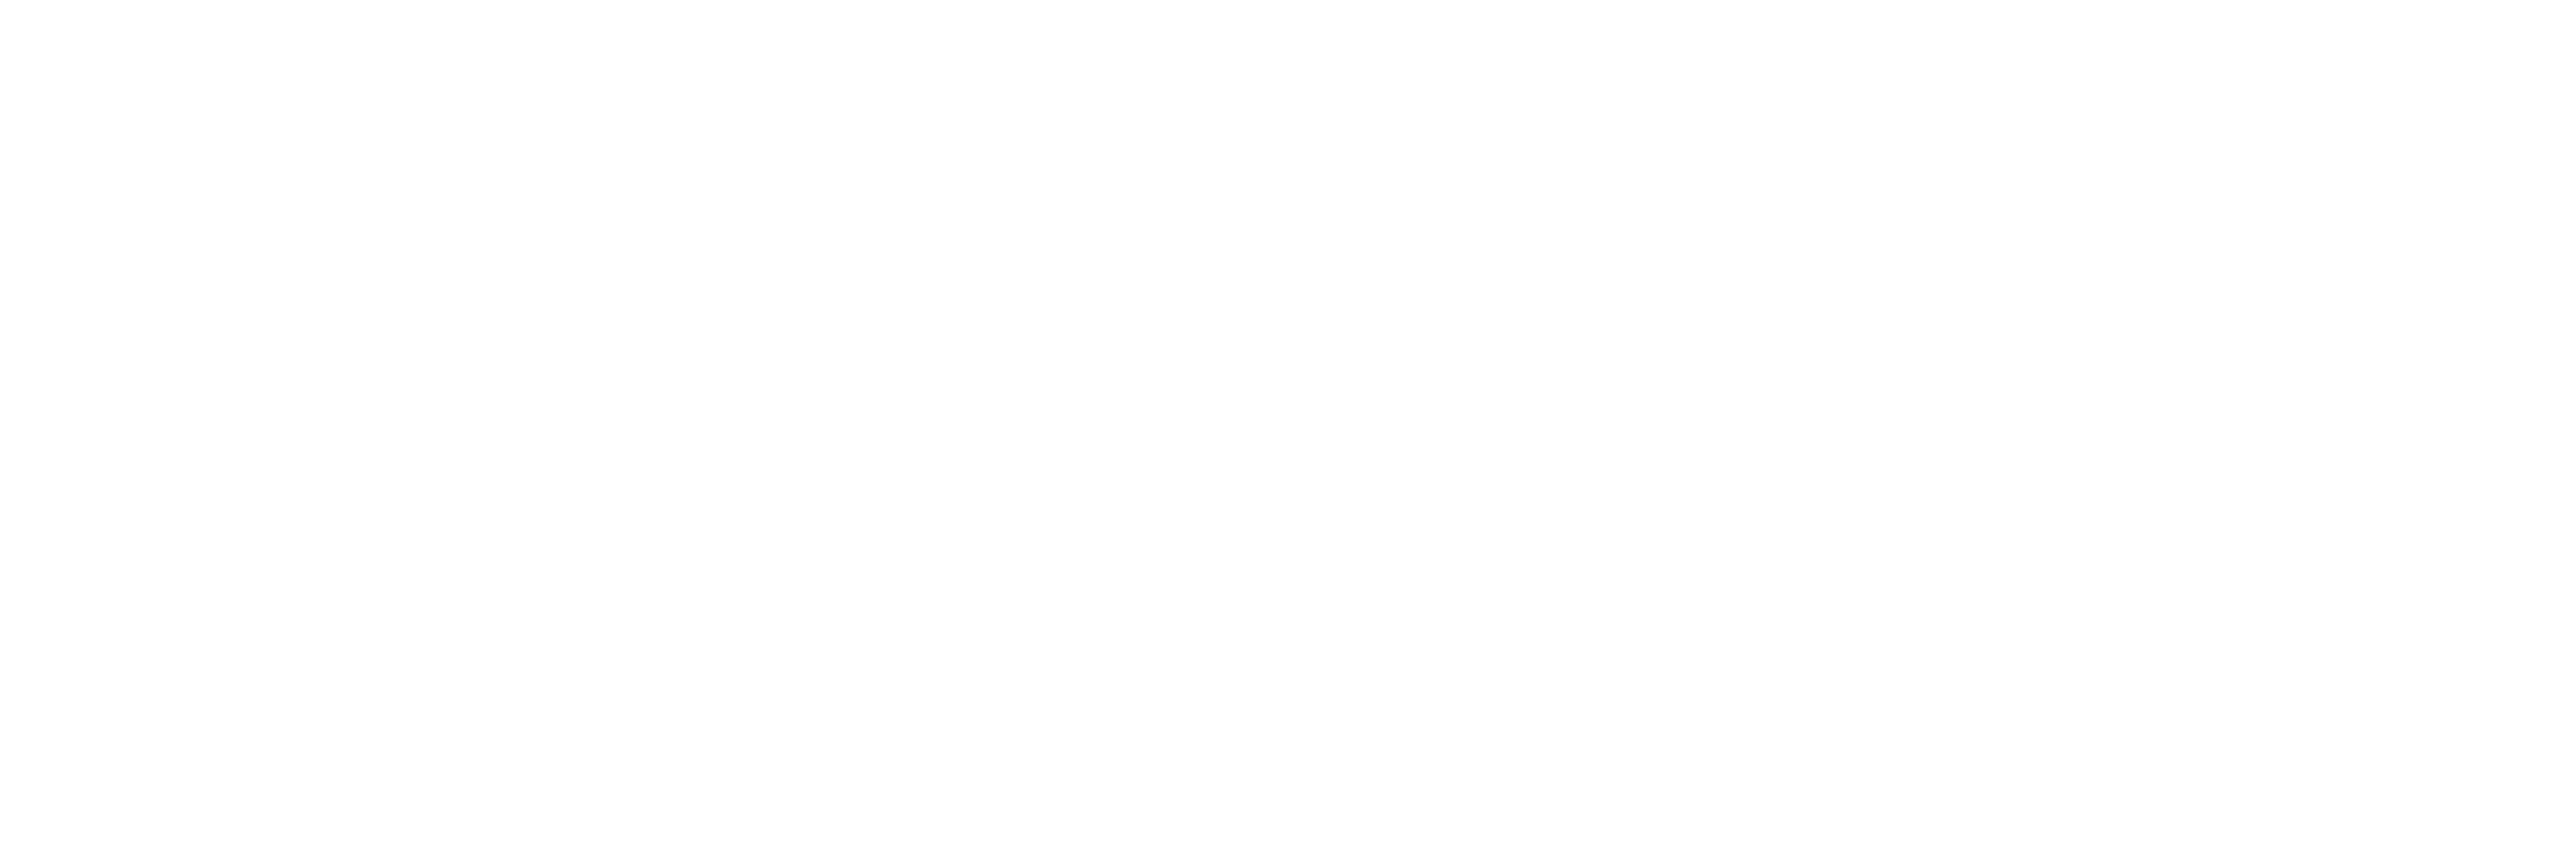 new-program-in-2-kansas-city-area-schools-gives-students-real-world